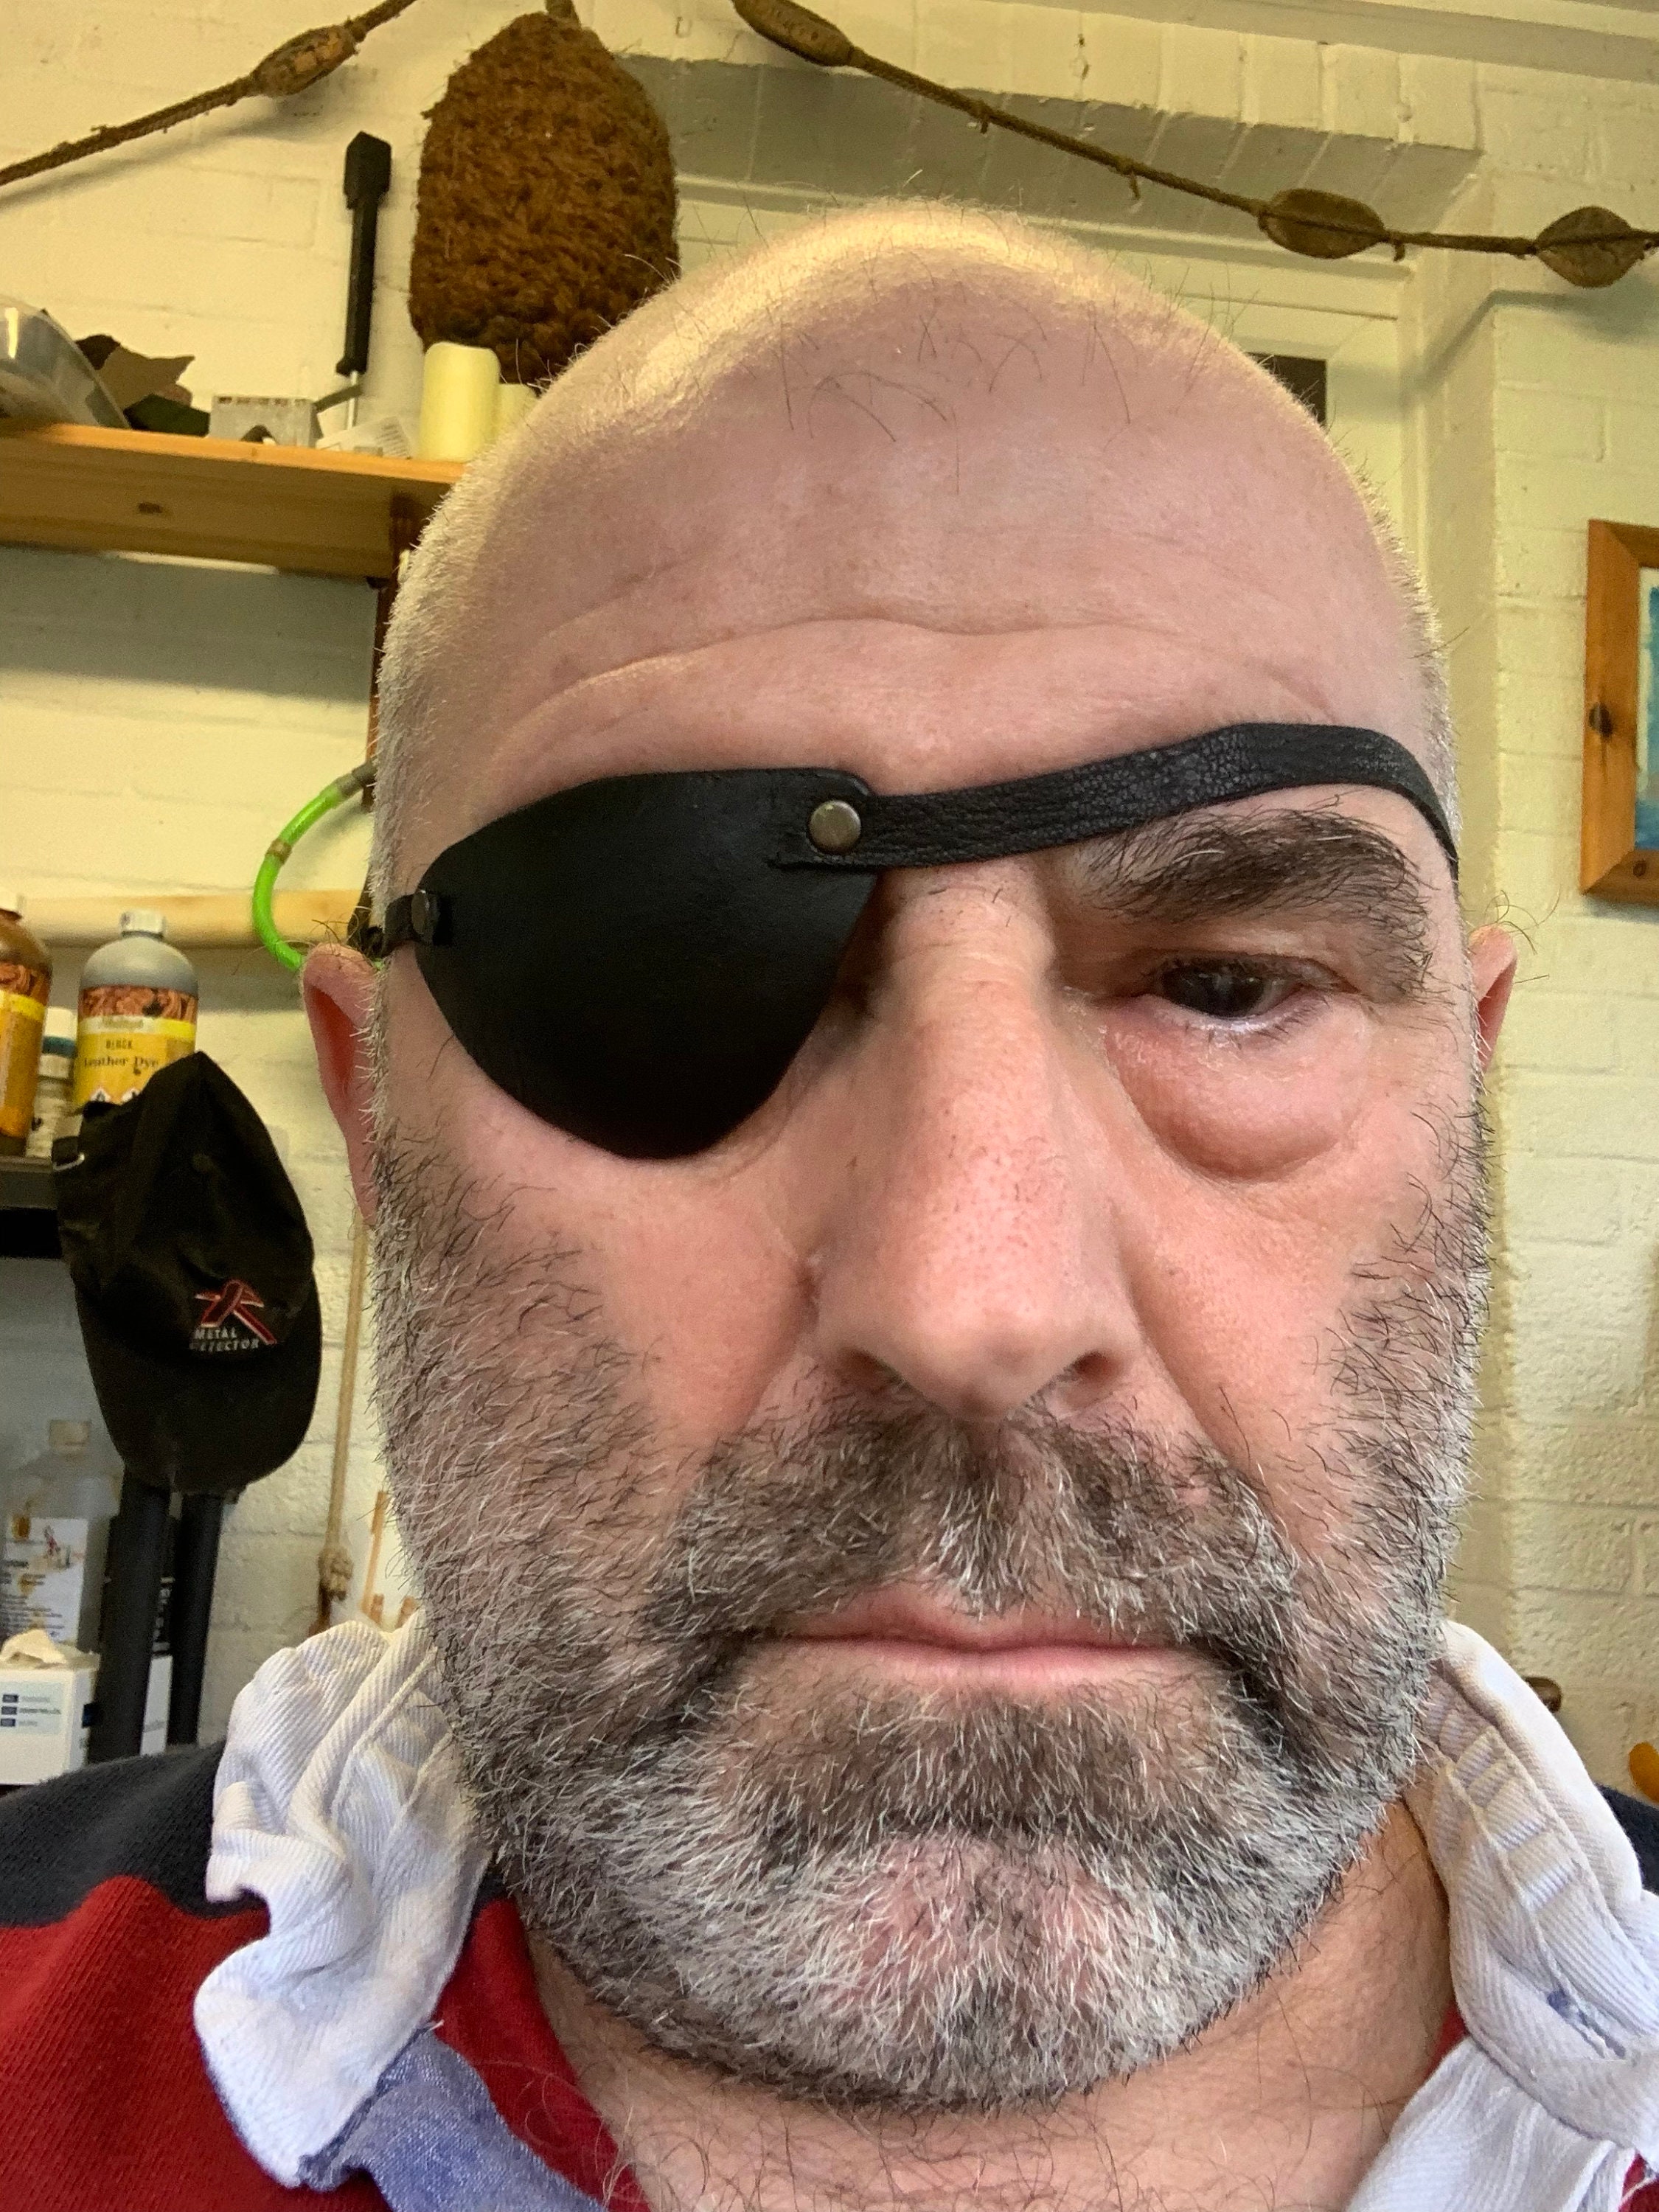 Handmade Slim Black or Brown Real Leather Eye Patch. Suitable for Permanent  Use. Medical eyepatch for Left or Right Eye.